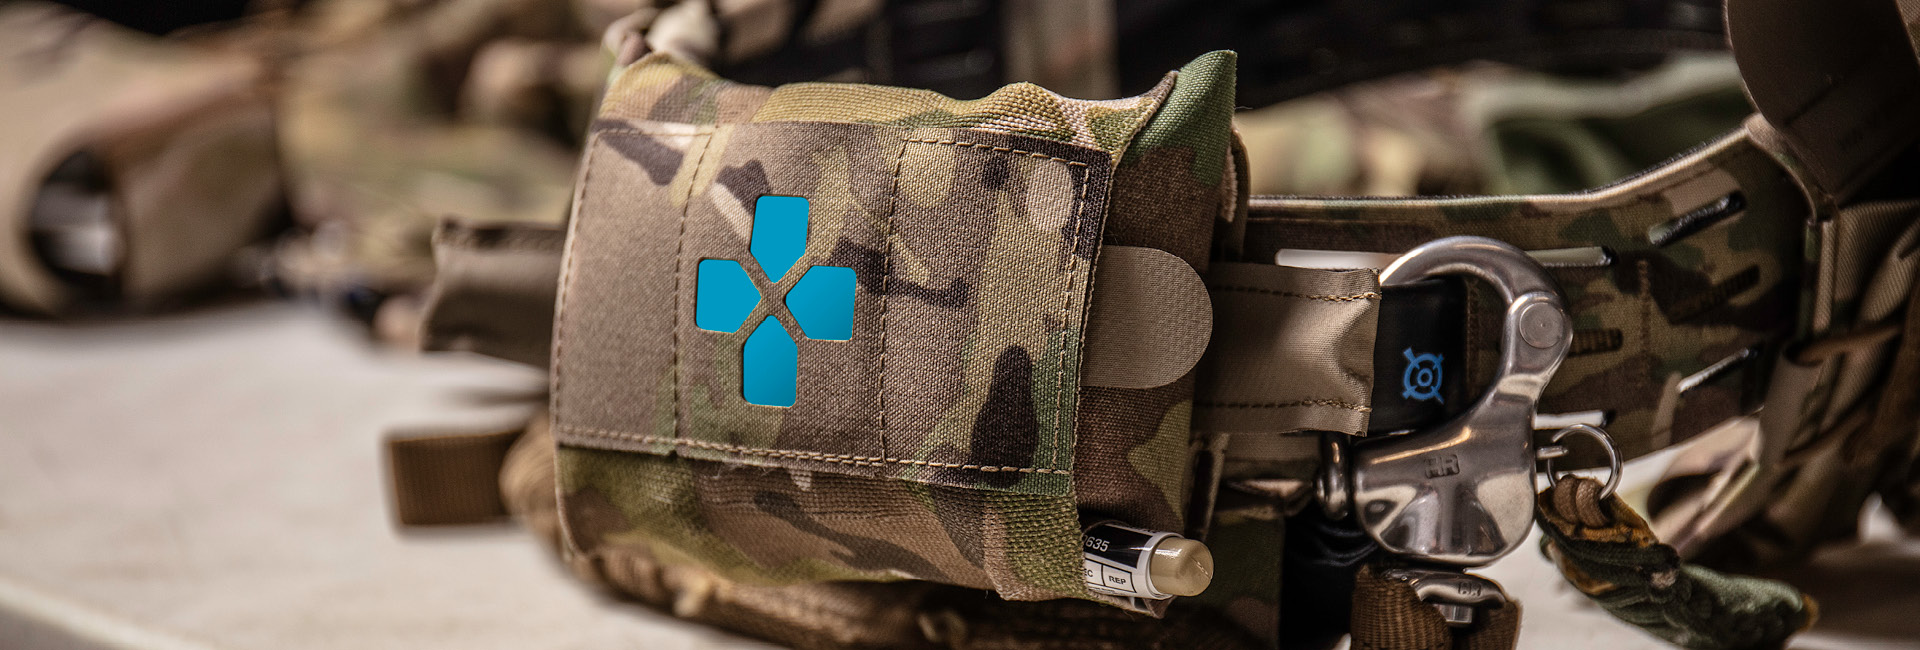 Blue Force Gear Micro Trauma Kit NOW! – Belt Mount – Empty (no medical  contents) – Get Tactical Supply